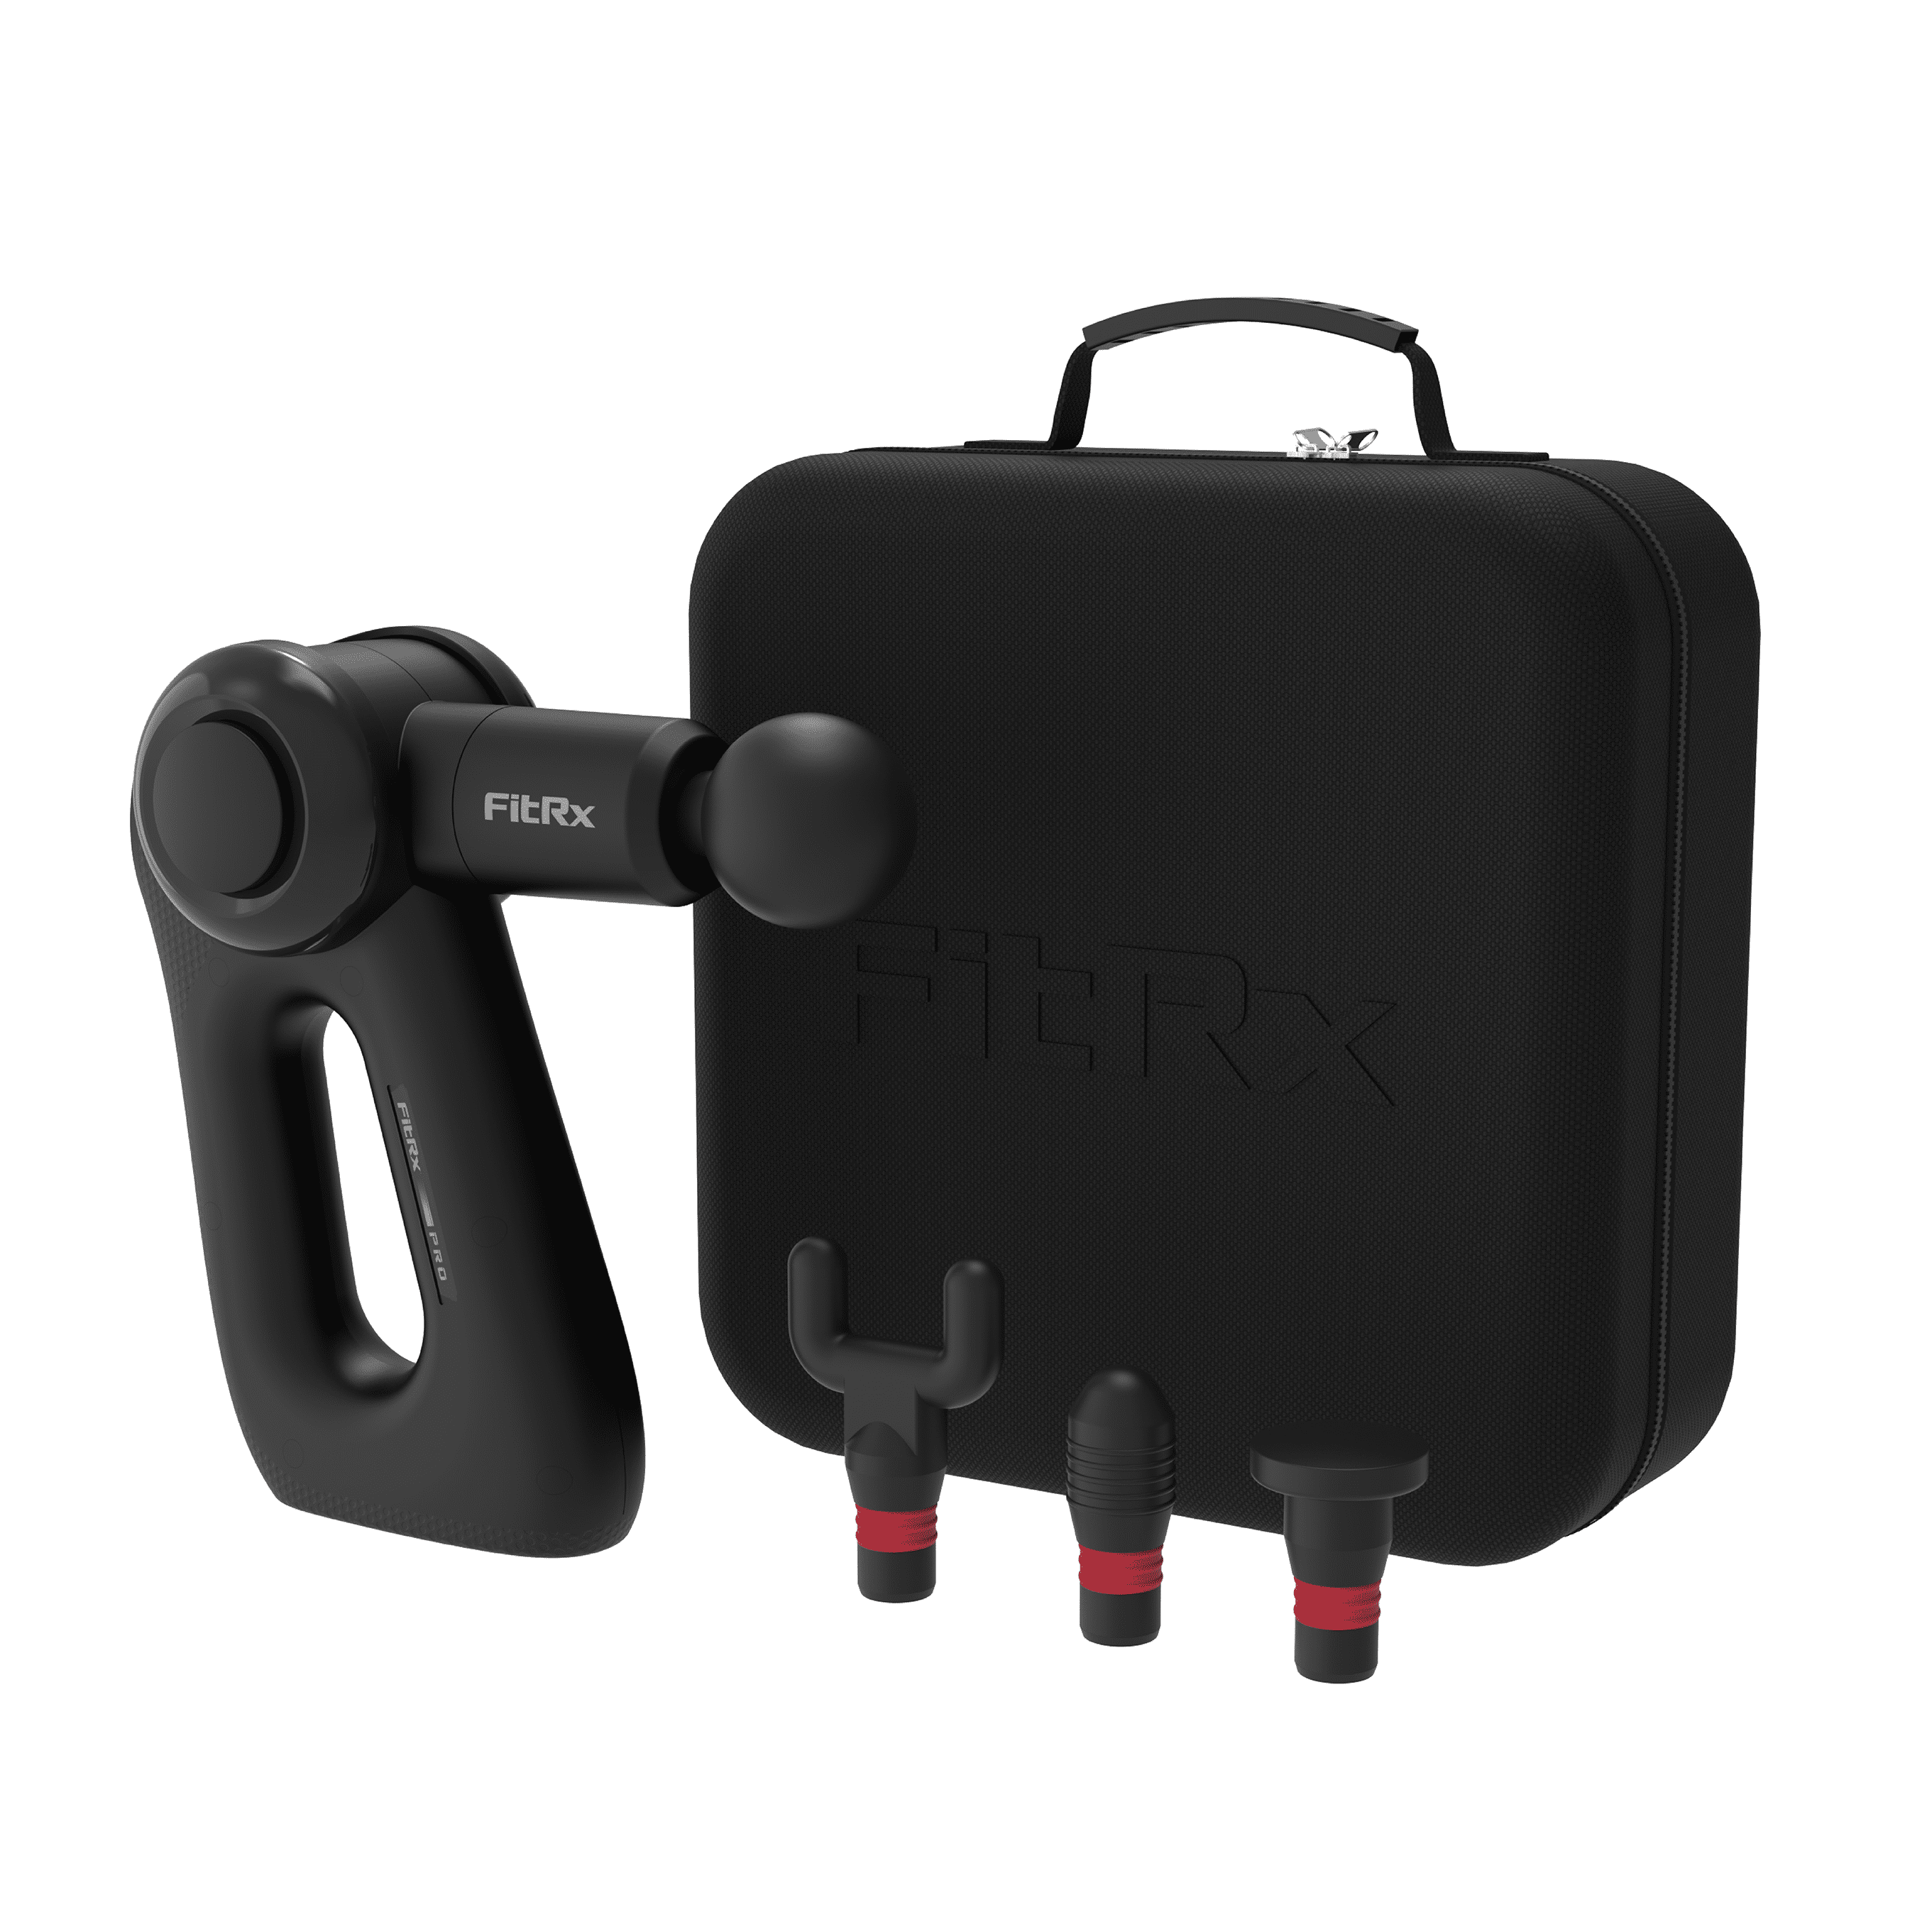 FitRx Pro Muscle Massage Gun, Handheld Percussion Massager with Multiple Speeds and Attachments for Neck and Back